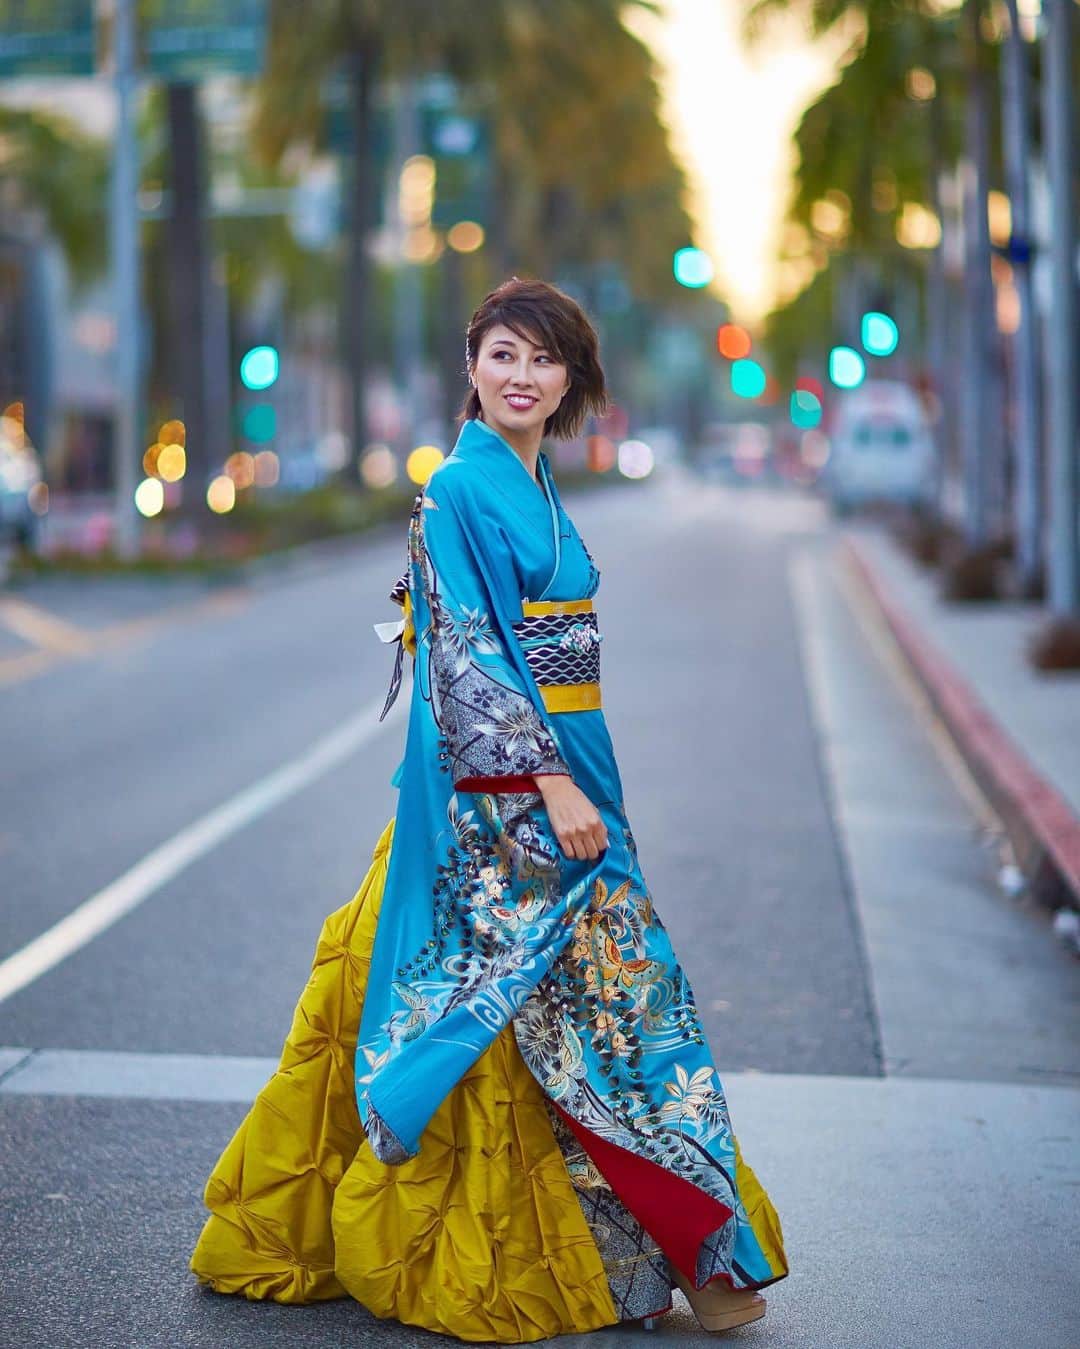 吉田ちかのインスタグラム：「📸: @kentaroterra  Throwback! My kimono dress photo shoot in Beverly Hills! Sueko & Kentaro of @kimono_sk  who work in Hollywood doing costume design and kimono rentals helped me with this amazing look! @akiko.artistry  did my make-up💄✨ It was definitely a photo shoot to remember!! ﻿ ﻿ We’ve been good friends with Sueko and Kentaro, ever since they dressed me up for the Golden Globes! I was looking at past photos and was surprised to see how many times we had met up both in Tokyo and in LA! ﻿ ﻿ I caught up with them on ZOOM the other day and despite everything that’s been happening, they were so positive and inspiring, and passionate as always! Thank you guys!! ﻿ ﻿ 2017年にタイムスリップ！ゴージャスすぎる着物ドレスを着てビバリーヒルズで撮影🌴✨ ハリウッドで衣装デザインや着物のレンタルをされている @kimono_sk のSuekoさんとKentaroさんとの素敵な思い出❤️ @akiko.artistry さんがメイクをしてくれました💄✨﻿ ﻿ お二人とはGolden Globeの振袖の着付け以来とても仲良くさせてもらっていて、過去の写真を見てたら、かなりの頻度で会っててびっくり！LAとTokyo、お互いがどちらかに行く度に会ってました😊﻿ ﻿ そんなお二人と先日ZOOMでハリウッドの現状やLAでの生活、日本文化の発信について色々と聞かせてもらいました！大変な状況の中、全くブレない二人の情熱と前向きな姿に沢山の元気をもらいました！YouTubeにアップしてますので、よかったら見てください💕」